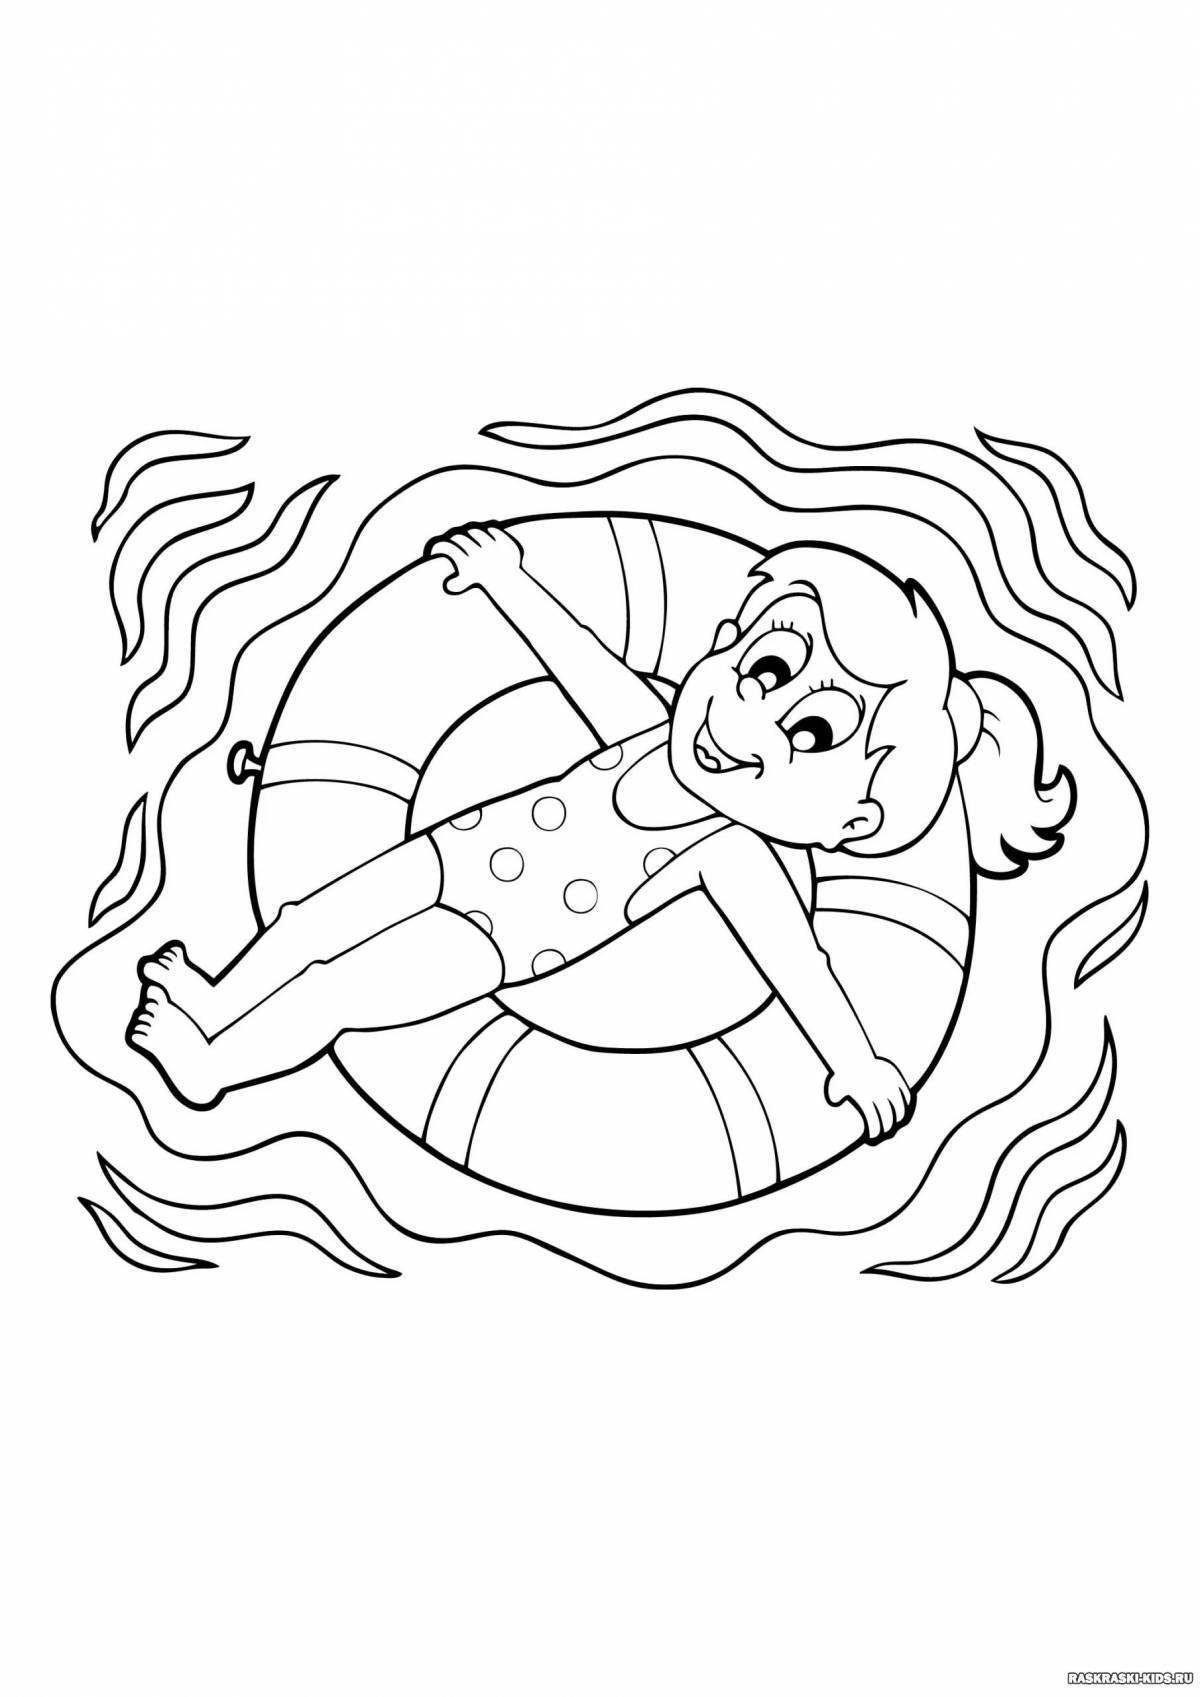 Coloring book stimulating water safety